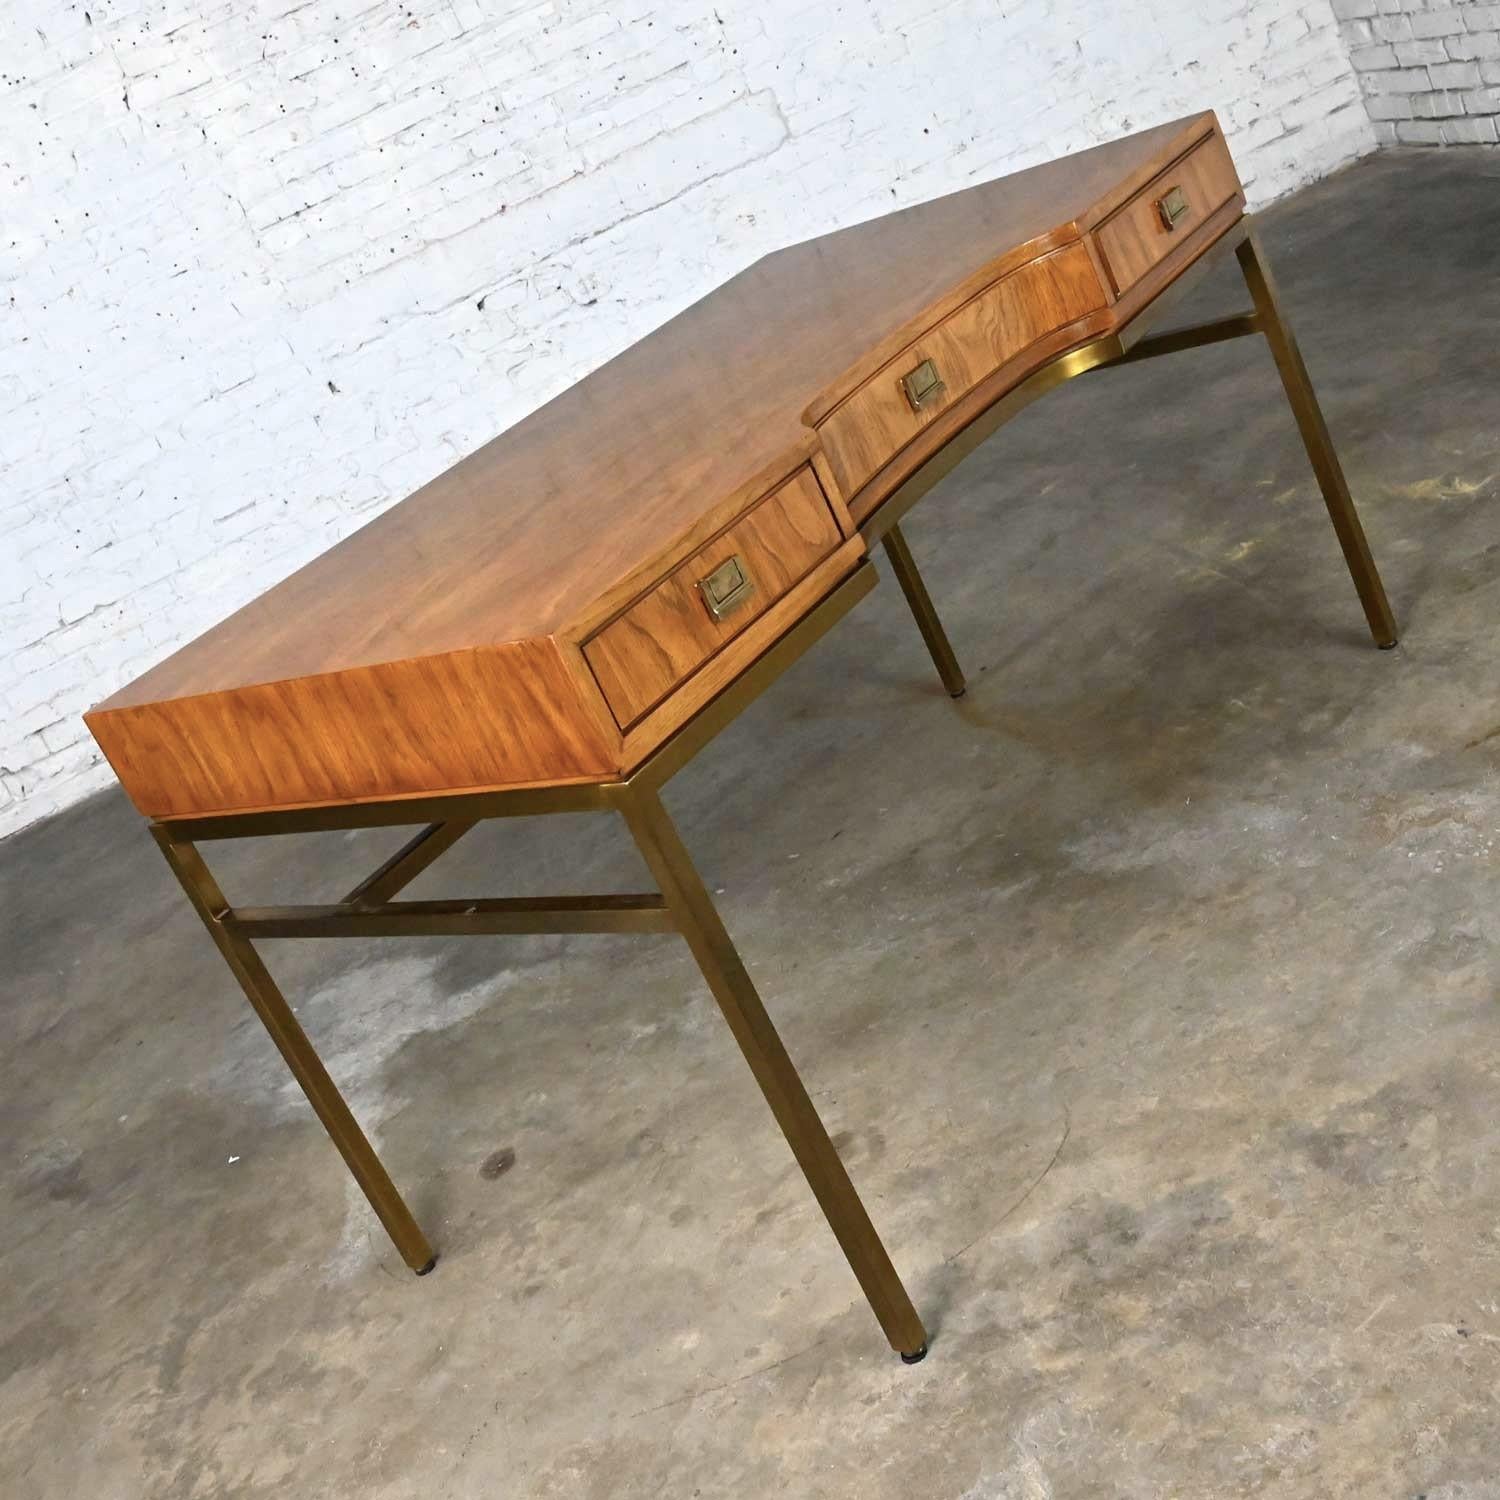 Handsome vintage ash veneer MCM writing desk on a brass plated metal frame with solid brass pulls from the Consensus Collection by Drexel. Beautiful condition, keeping in mind that this is vintage and not new so will have signs of use and wear. The